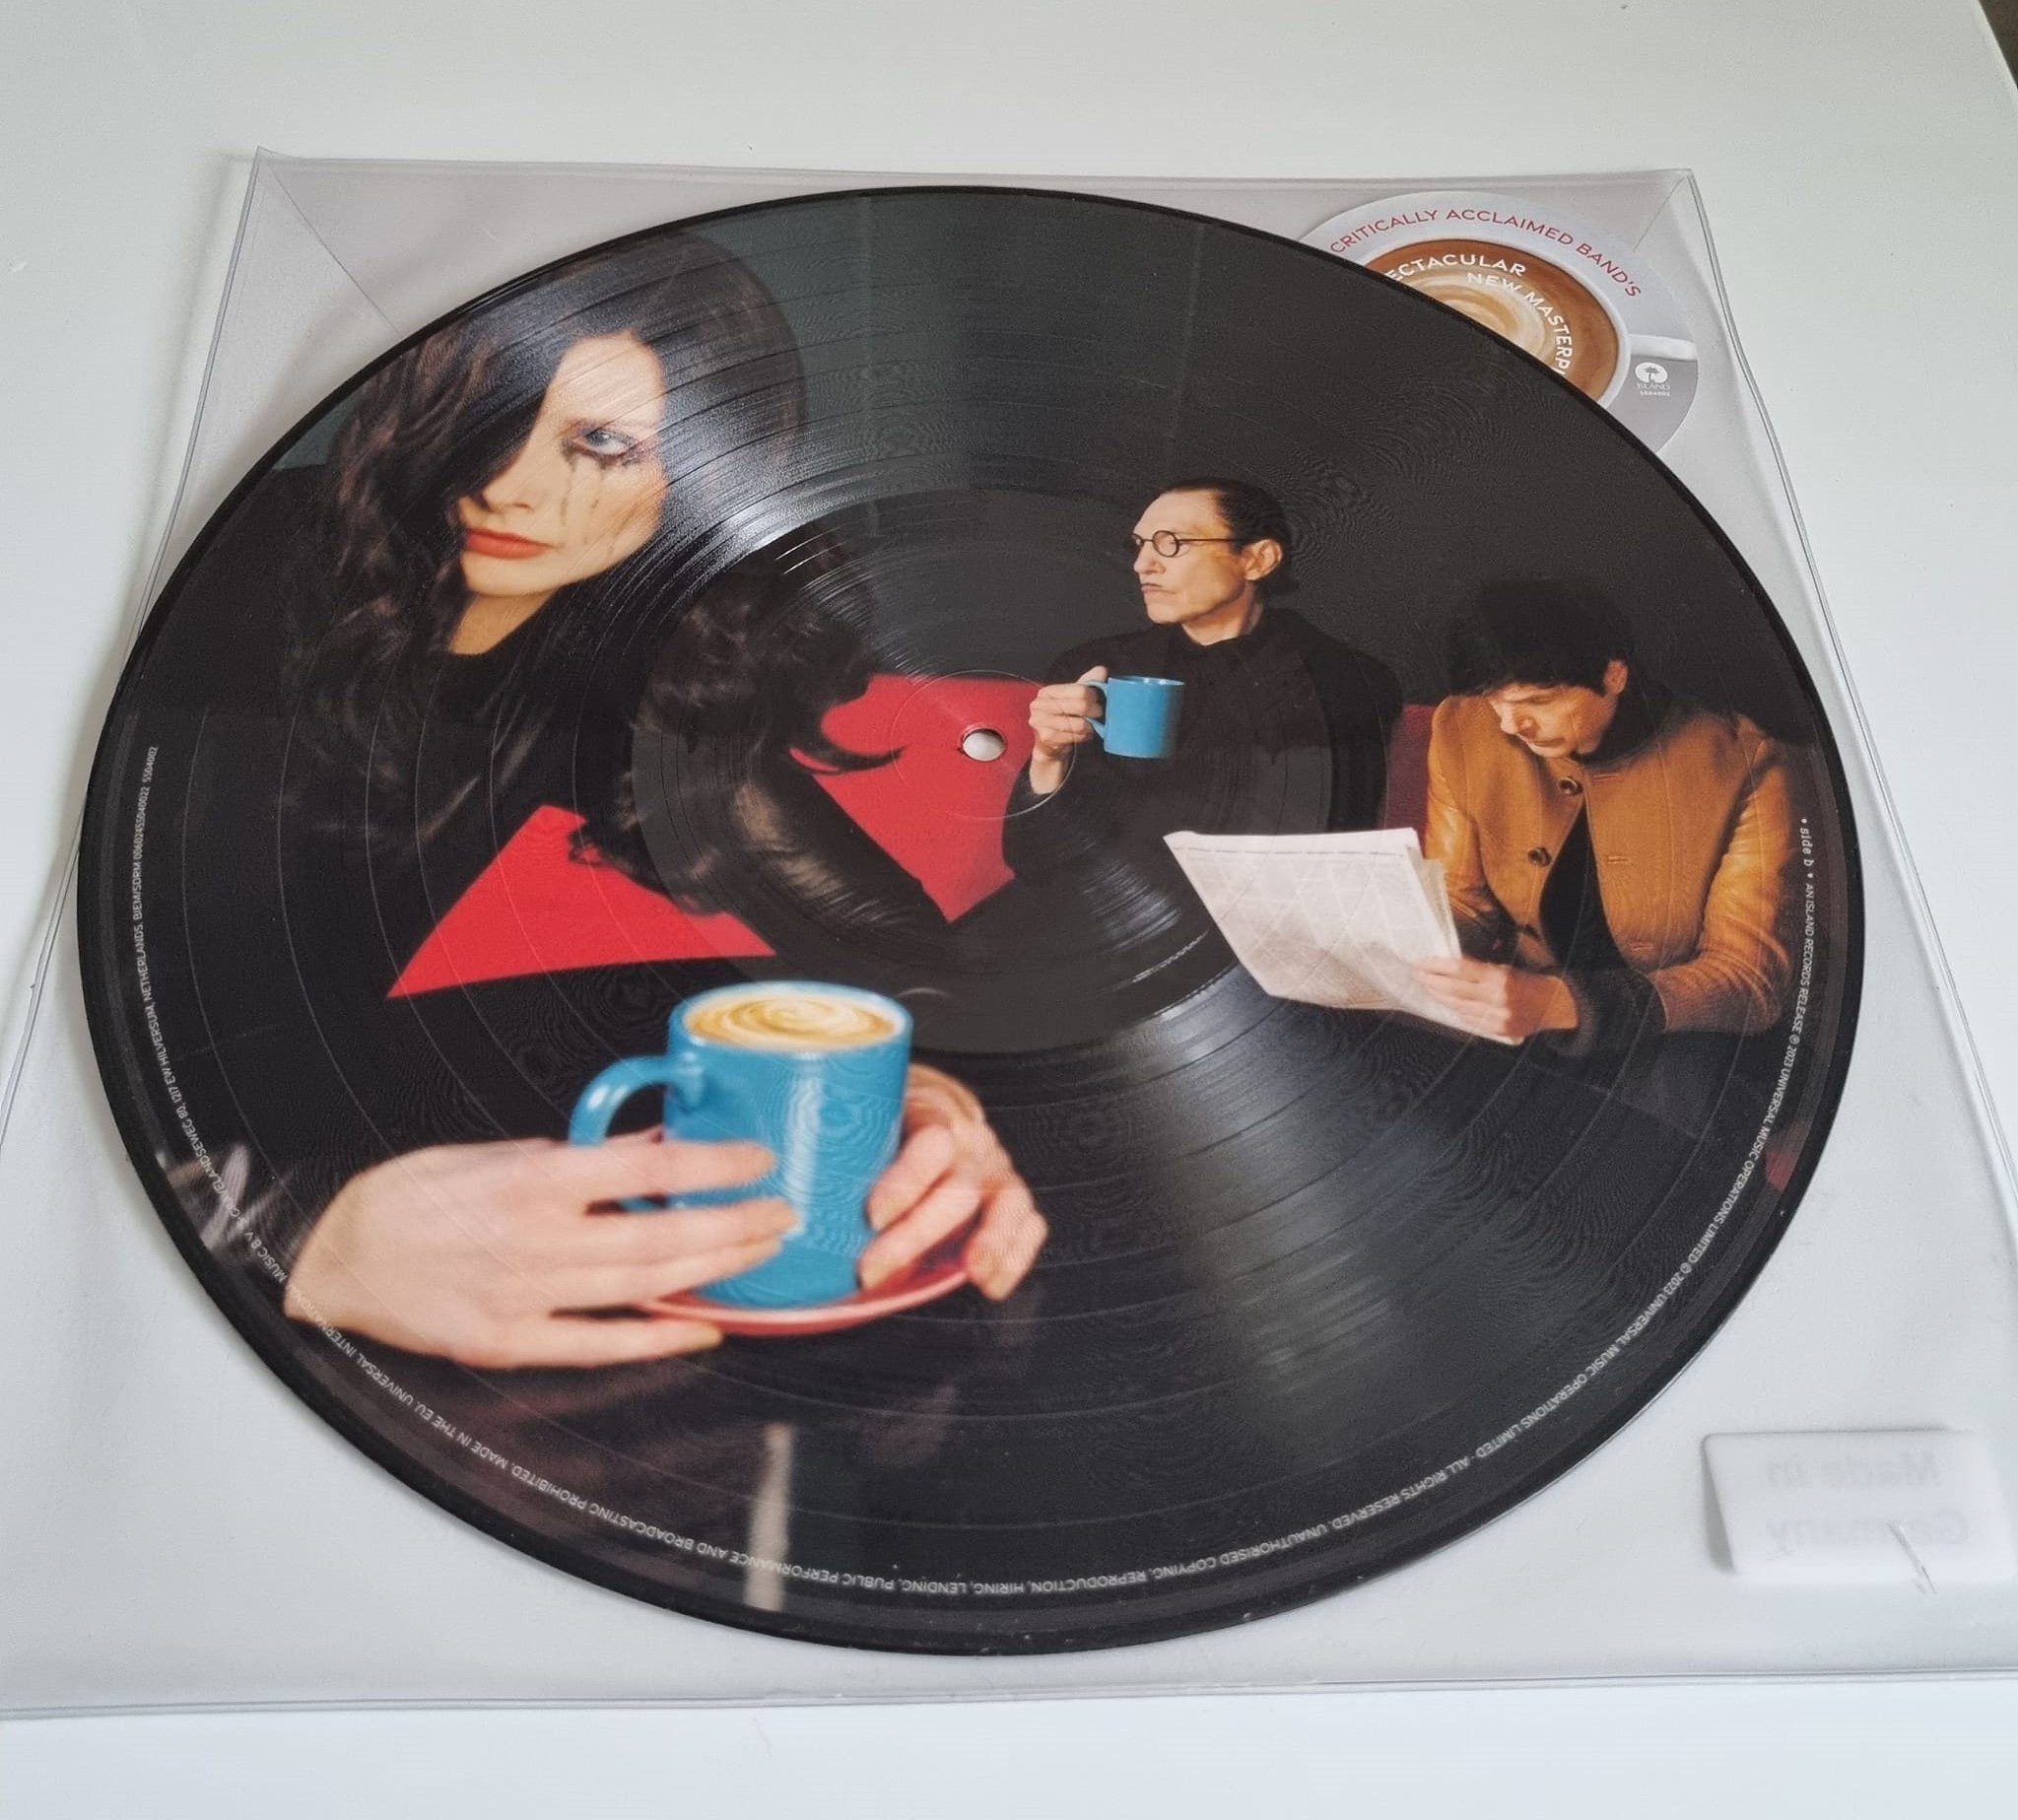 Buy this rare Sparks record by clicking here